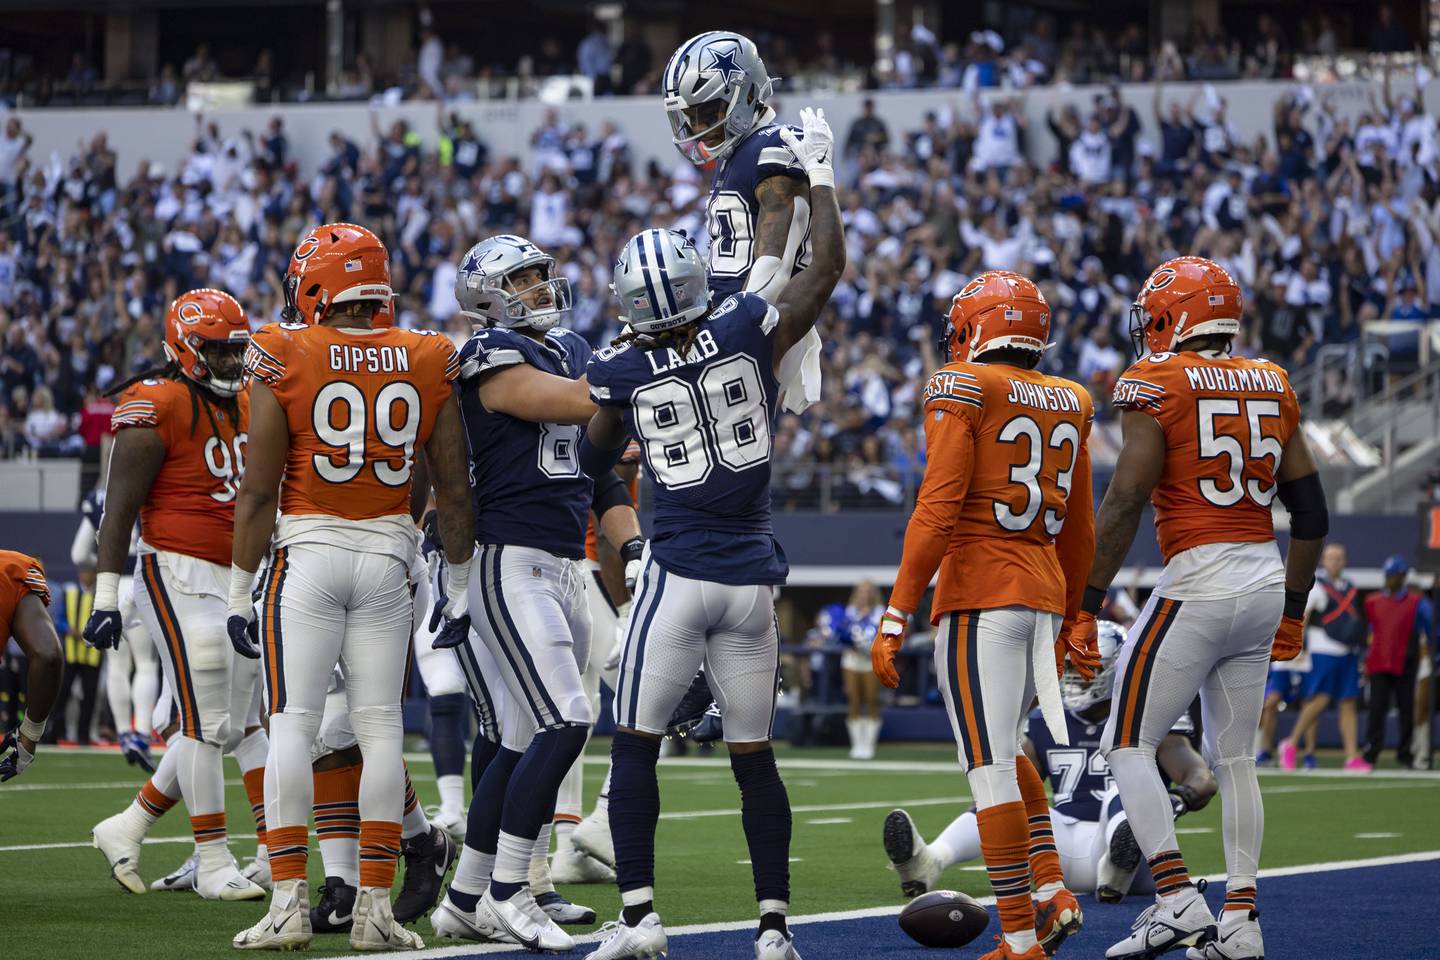 Cowboys running back Tony Pollard celebrates his touchdown in the third quarter on Oct. 30, 2022.